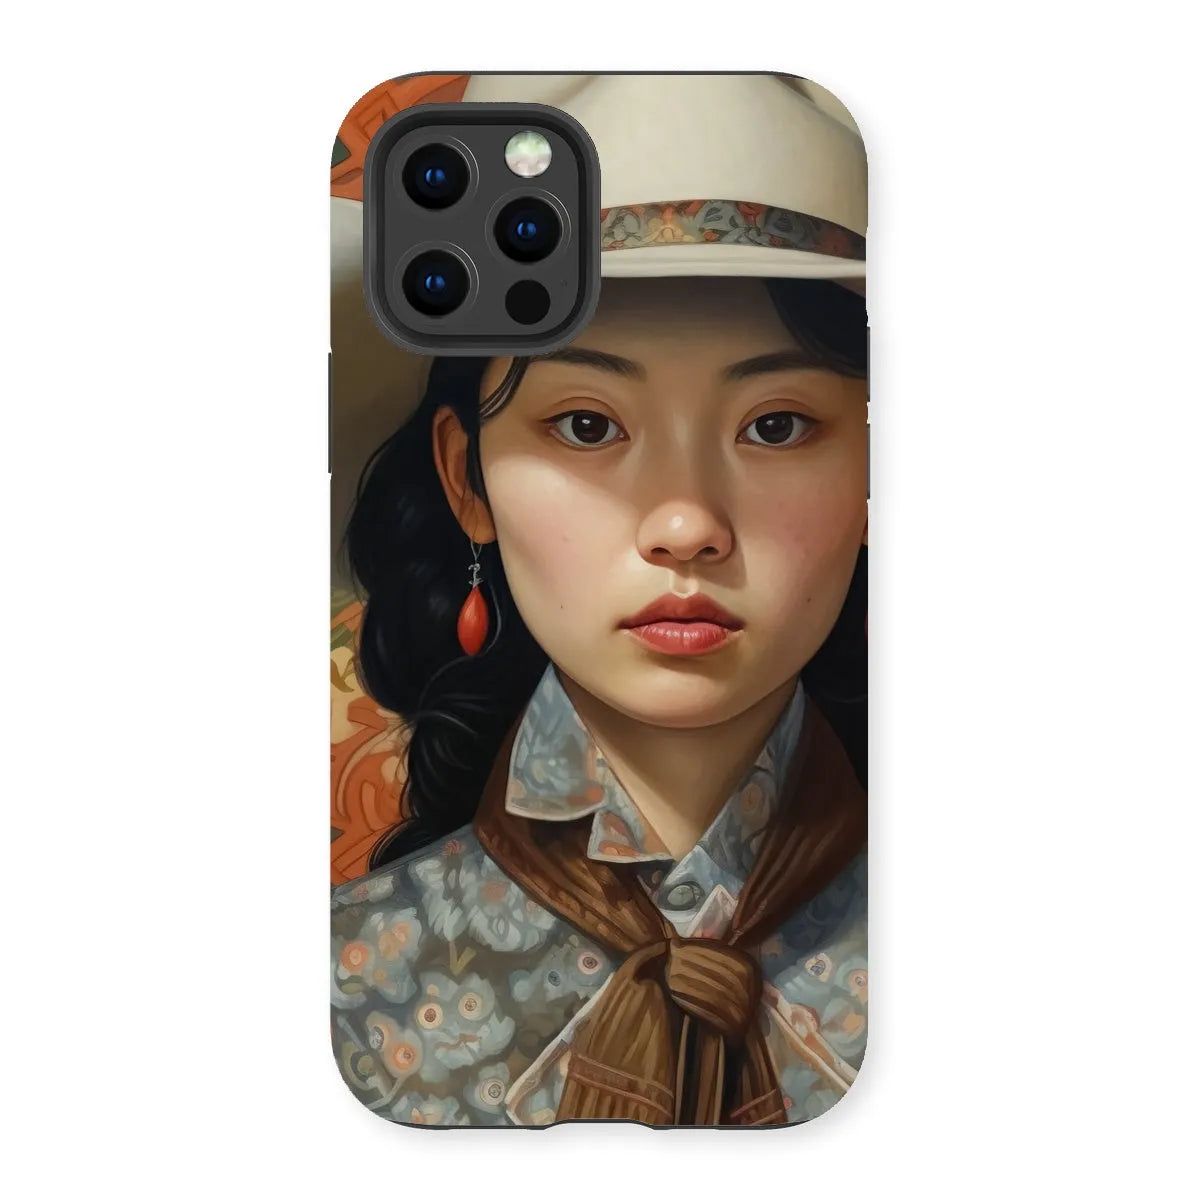 Zhi The Lesbian Cowgirl - Sapphic Art Phone Case - Iphone 13 Pro / Matte - Mobile Phone Cases - Aesthetic Art